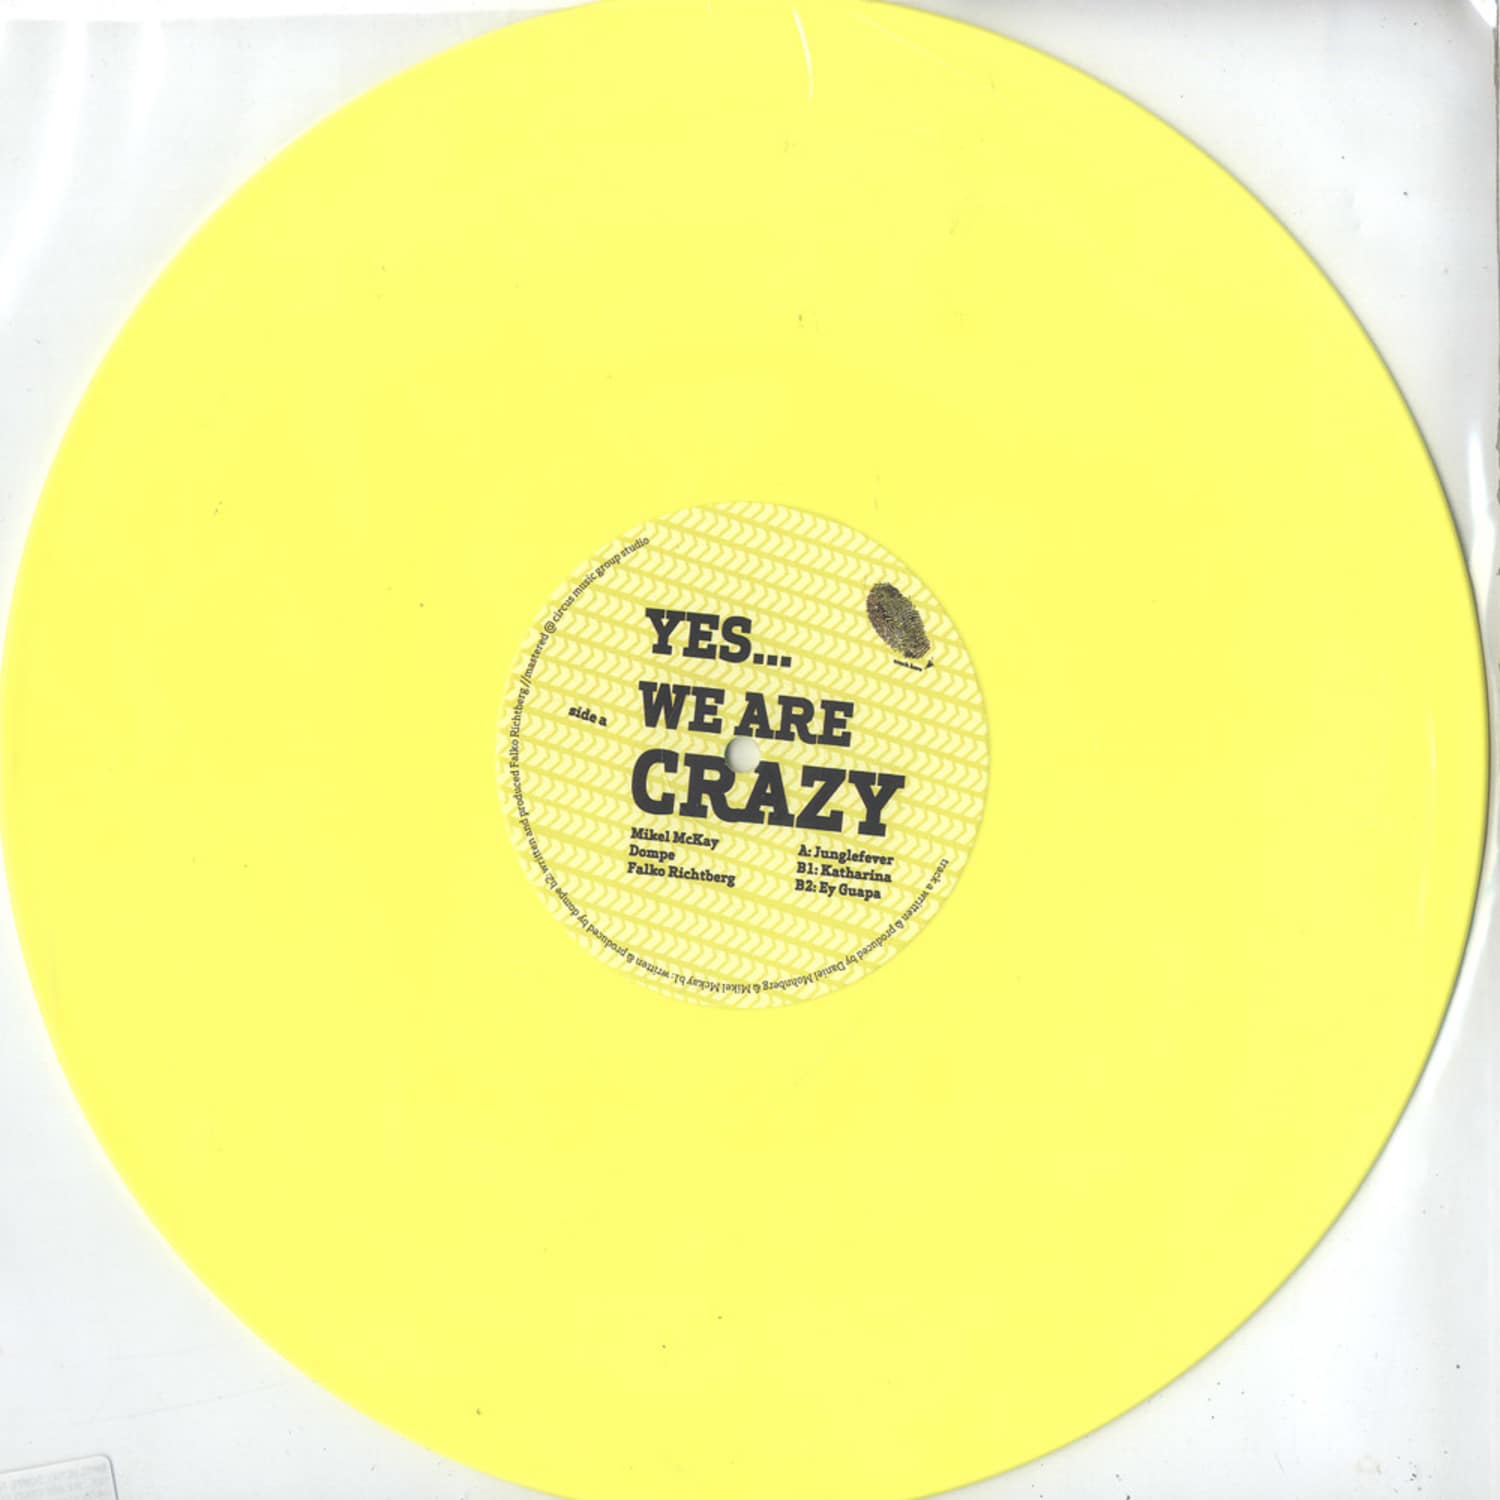 Mikel Mckay, Dompe, Falko Richtberg - YES... WE ARE CRAZY EP 